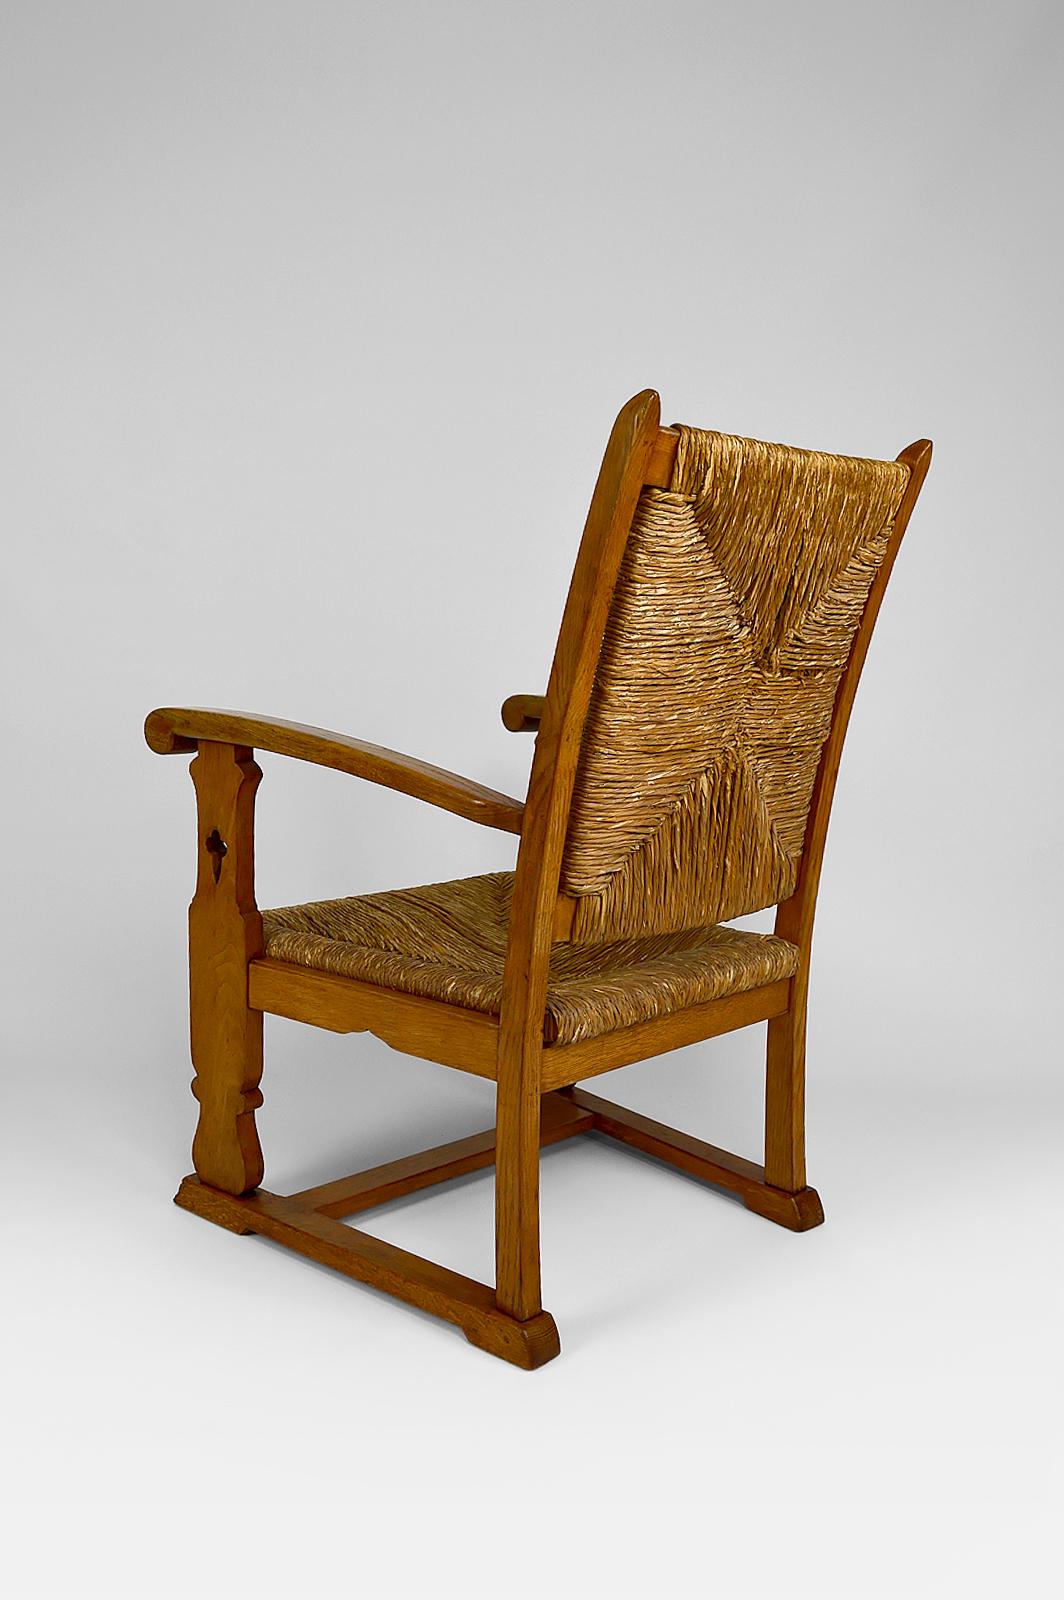 Art & Crafts / Gothic Revival Armchair in Oak and Straw, circa 1900 2